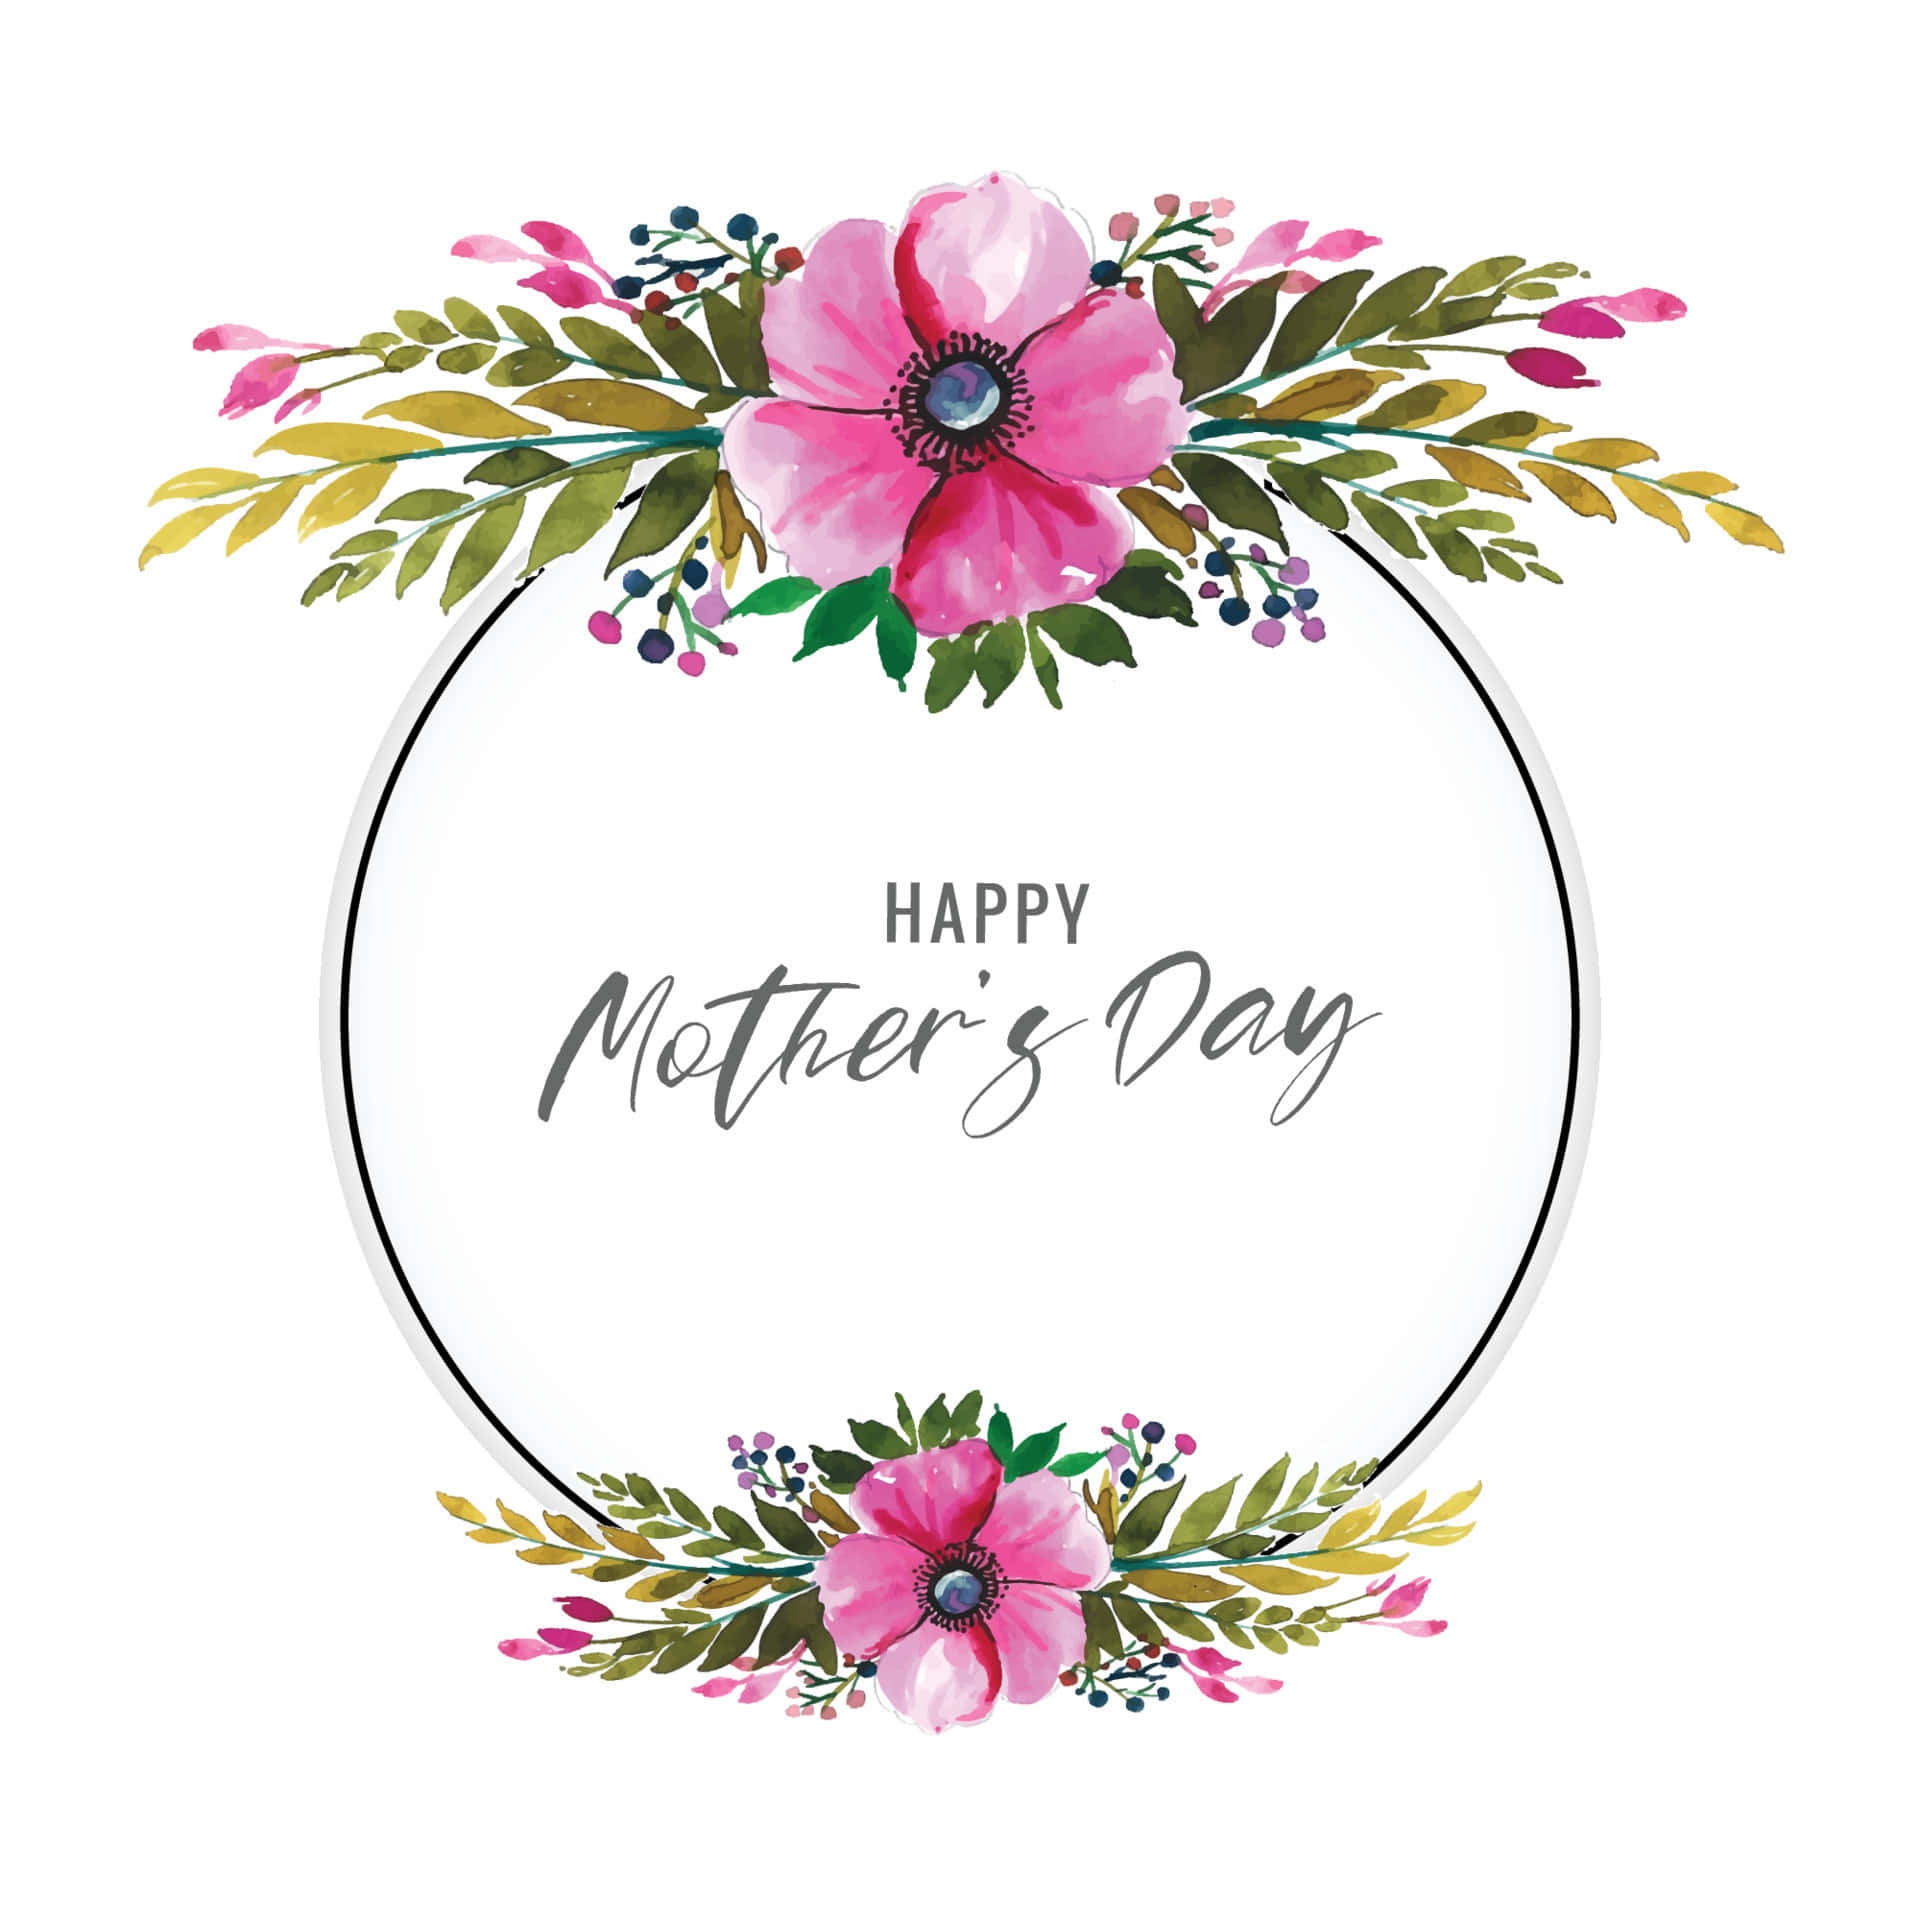 Happy Mothers Day Card With Flowers And Leaves